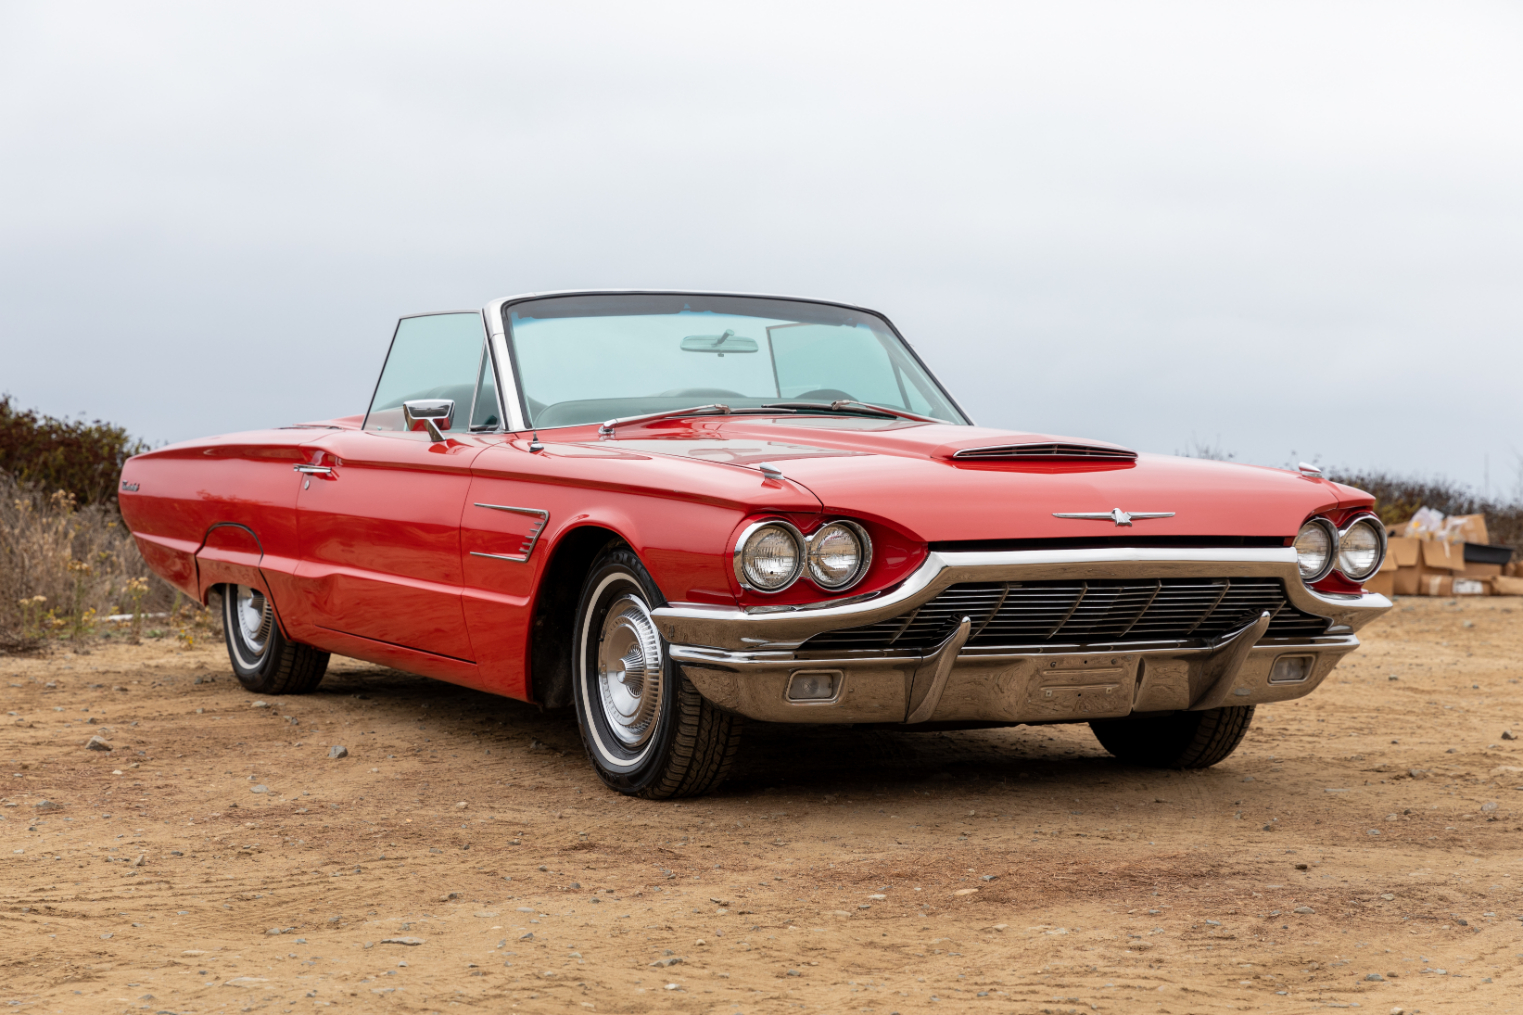 Used 1965 Ford Thunderbird Convertible Review